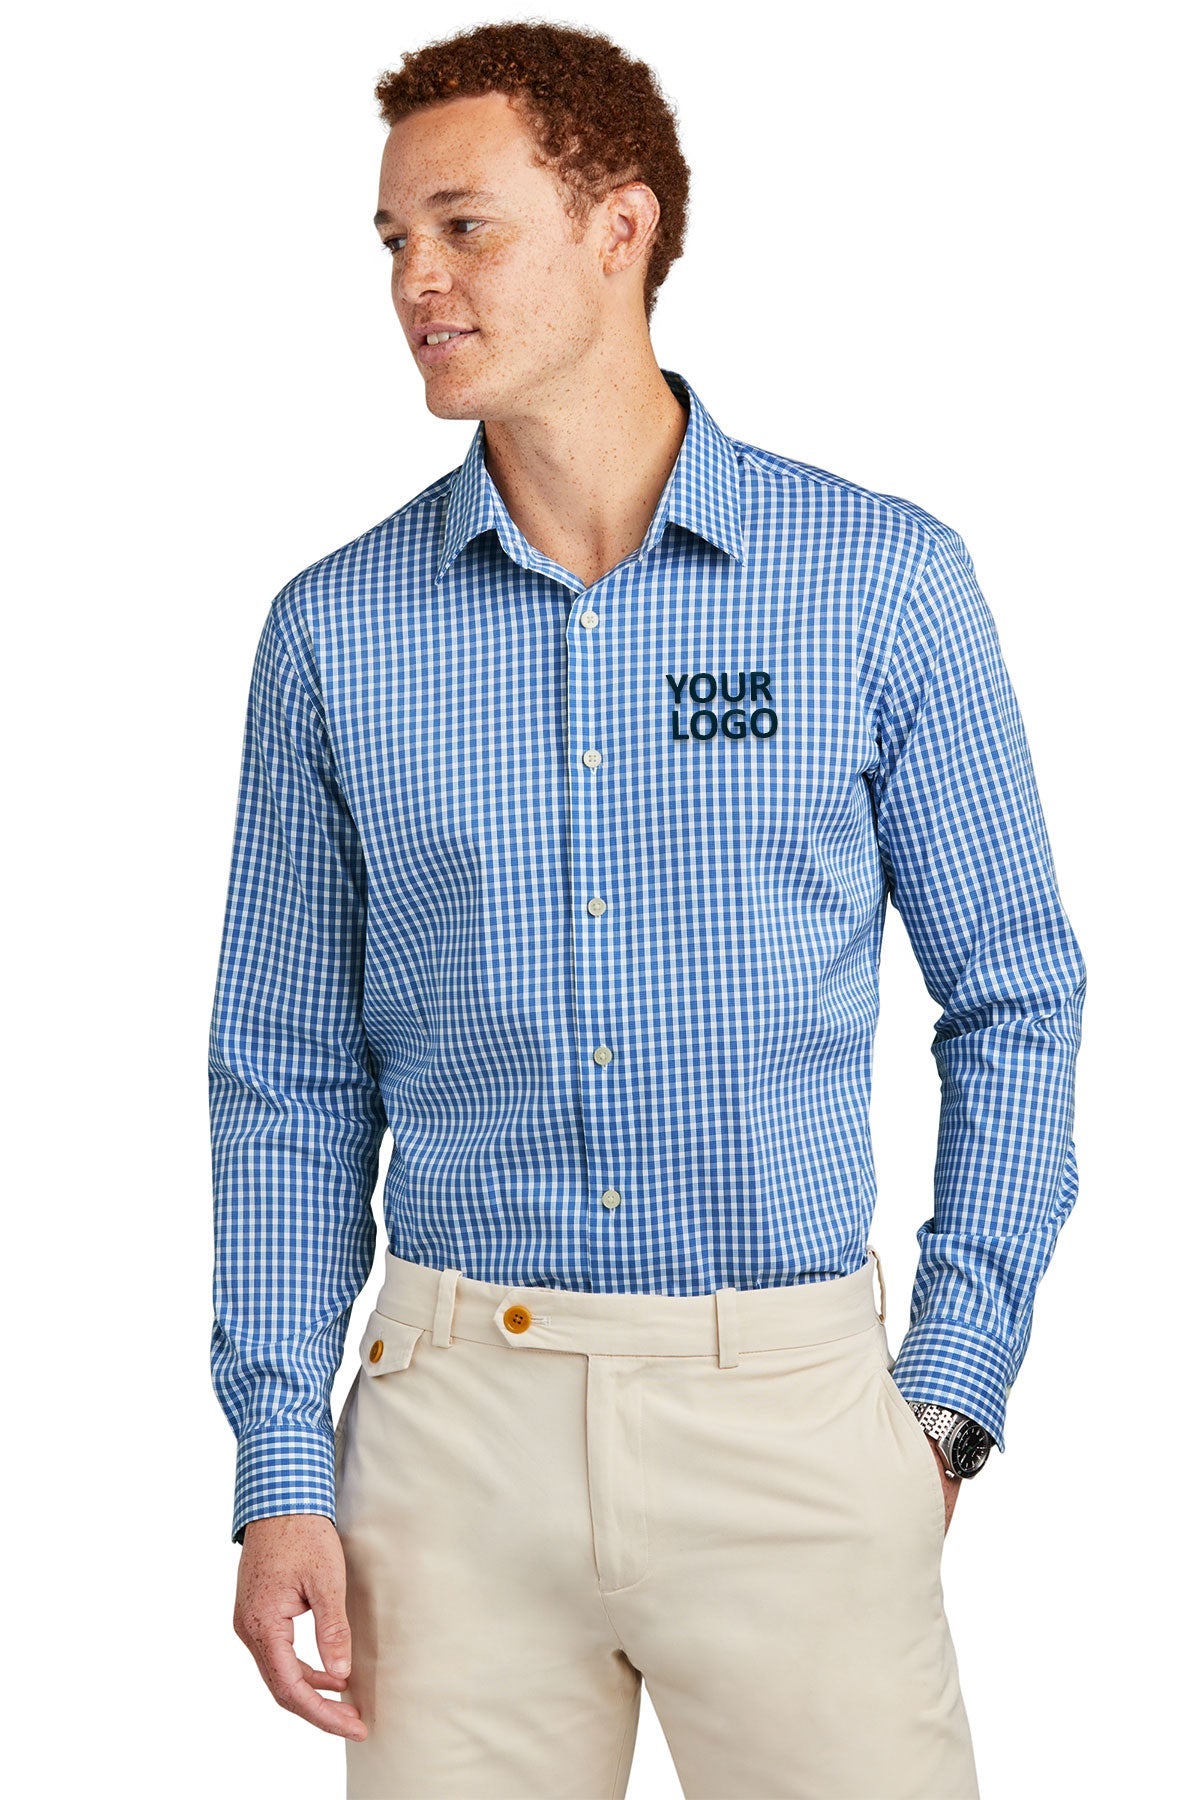 Brooks Brothers Tech Stretch Patterned Shirt, Charter Blue Check